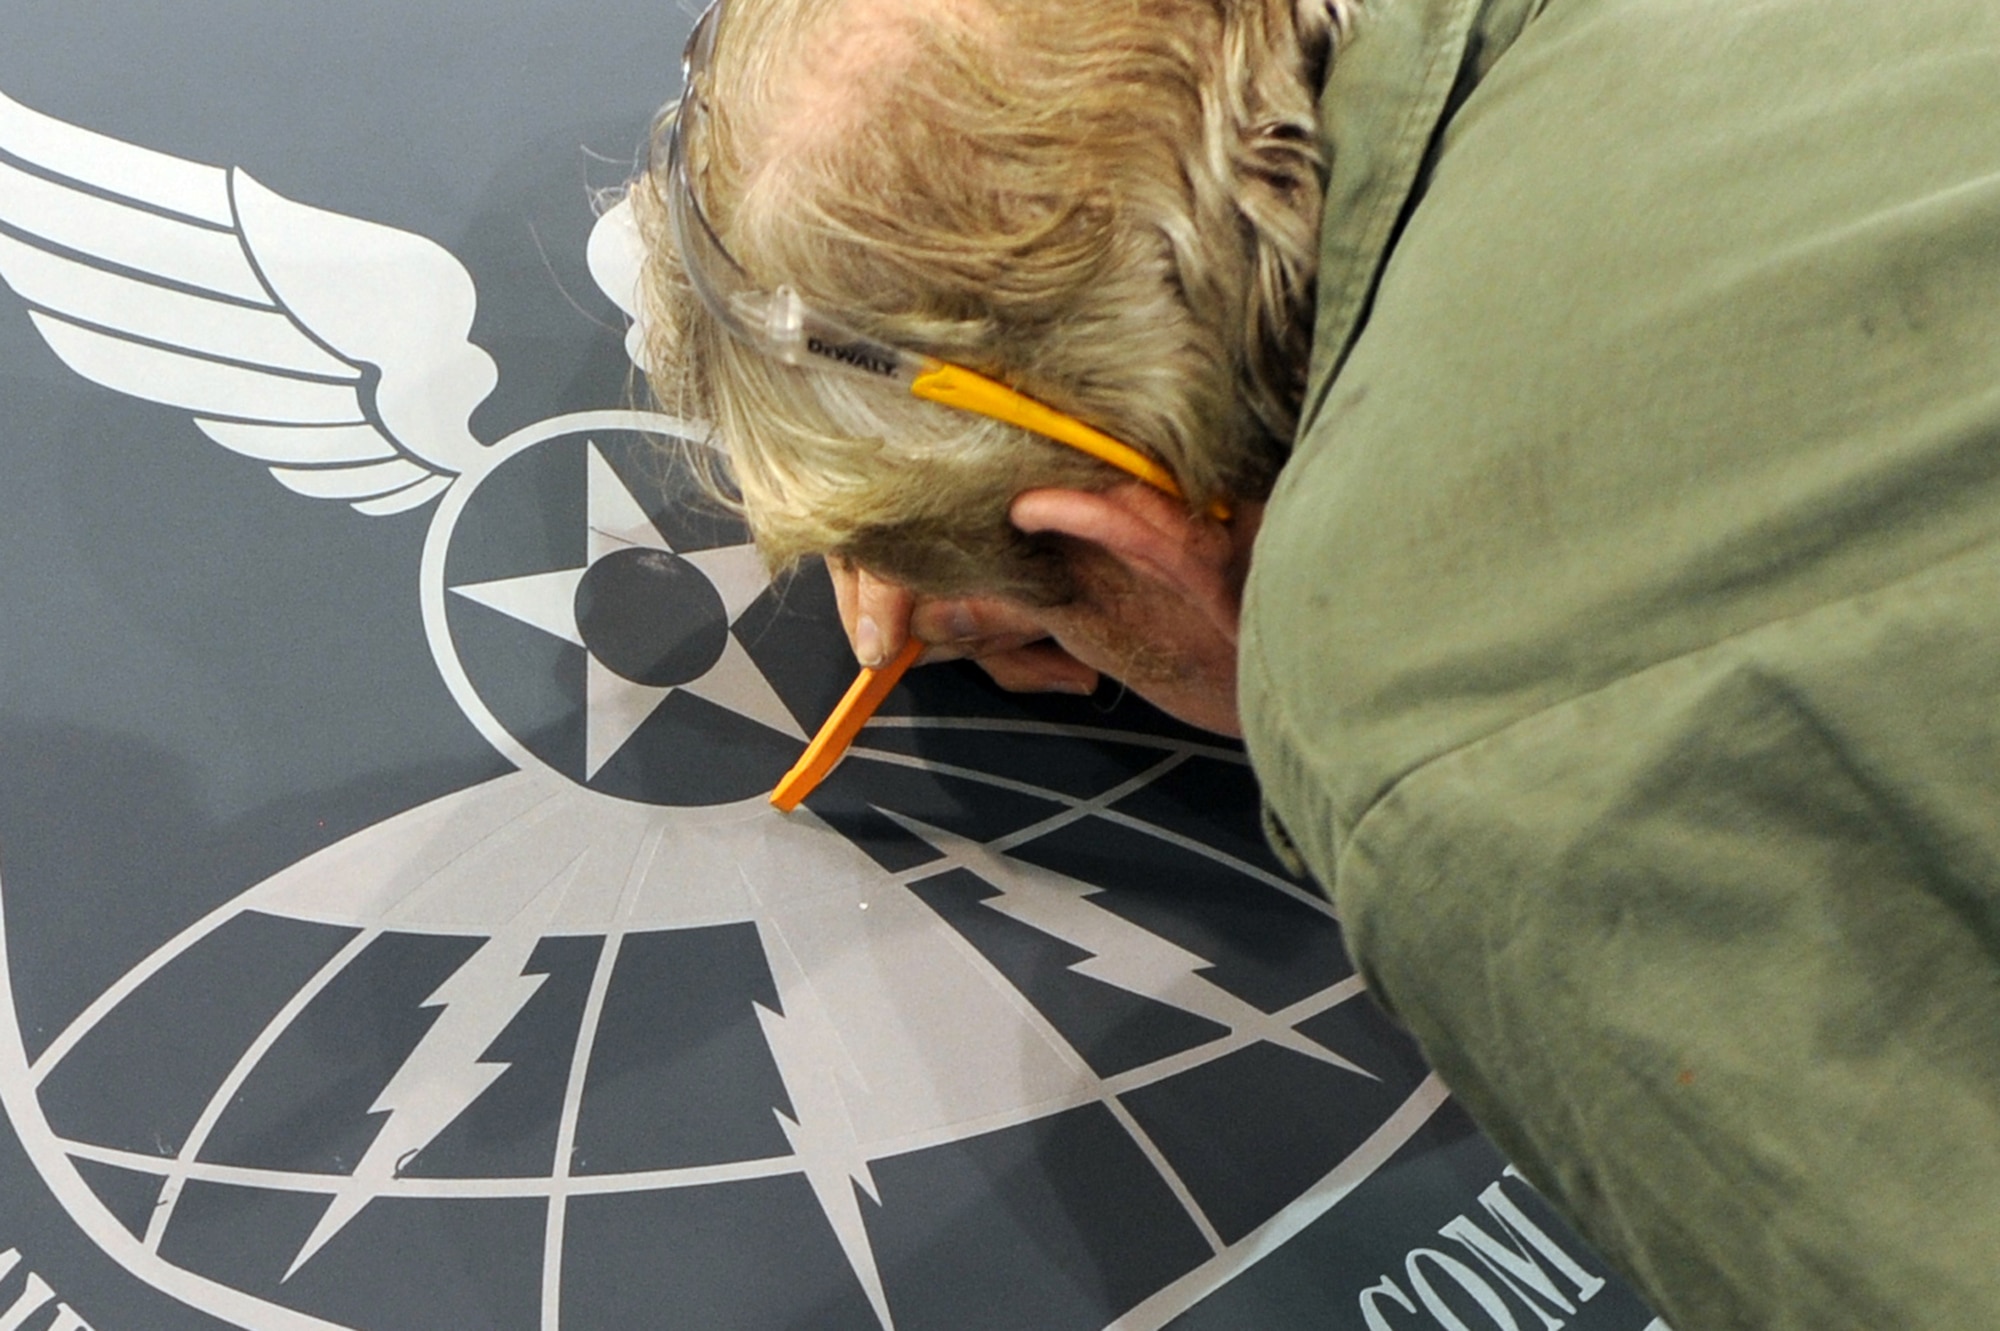 WHITEMAN AIR FORCE BASE, Mo. - Brian Geary, 509th Maintenance Squadron structural maintenance low-observable technician, uses a rubber tool to peel off the stencil from around the newly-sprayed Air Force Global Strike Command patch on a B-2 Spirit, Jan. 25, 2010. On Feb. 1, 2010, Whiteman AFB and its arsenal of 20 B-2 bombers will change commands from Air Combat Command to AFGSC. The mission of AFGSC is to "develop and provide combat-ready forces for nuclear deterrence and global strike operations -- safe -- secure -- credible to support the President of the United States and combatant commanders." (U.S. Air Force photo by Airman 1st Class Carlin Leslie) (Released)
